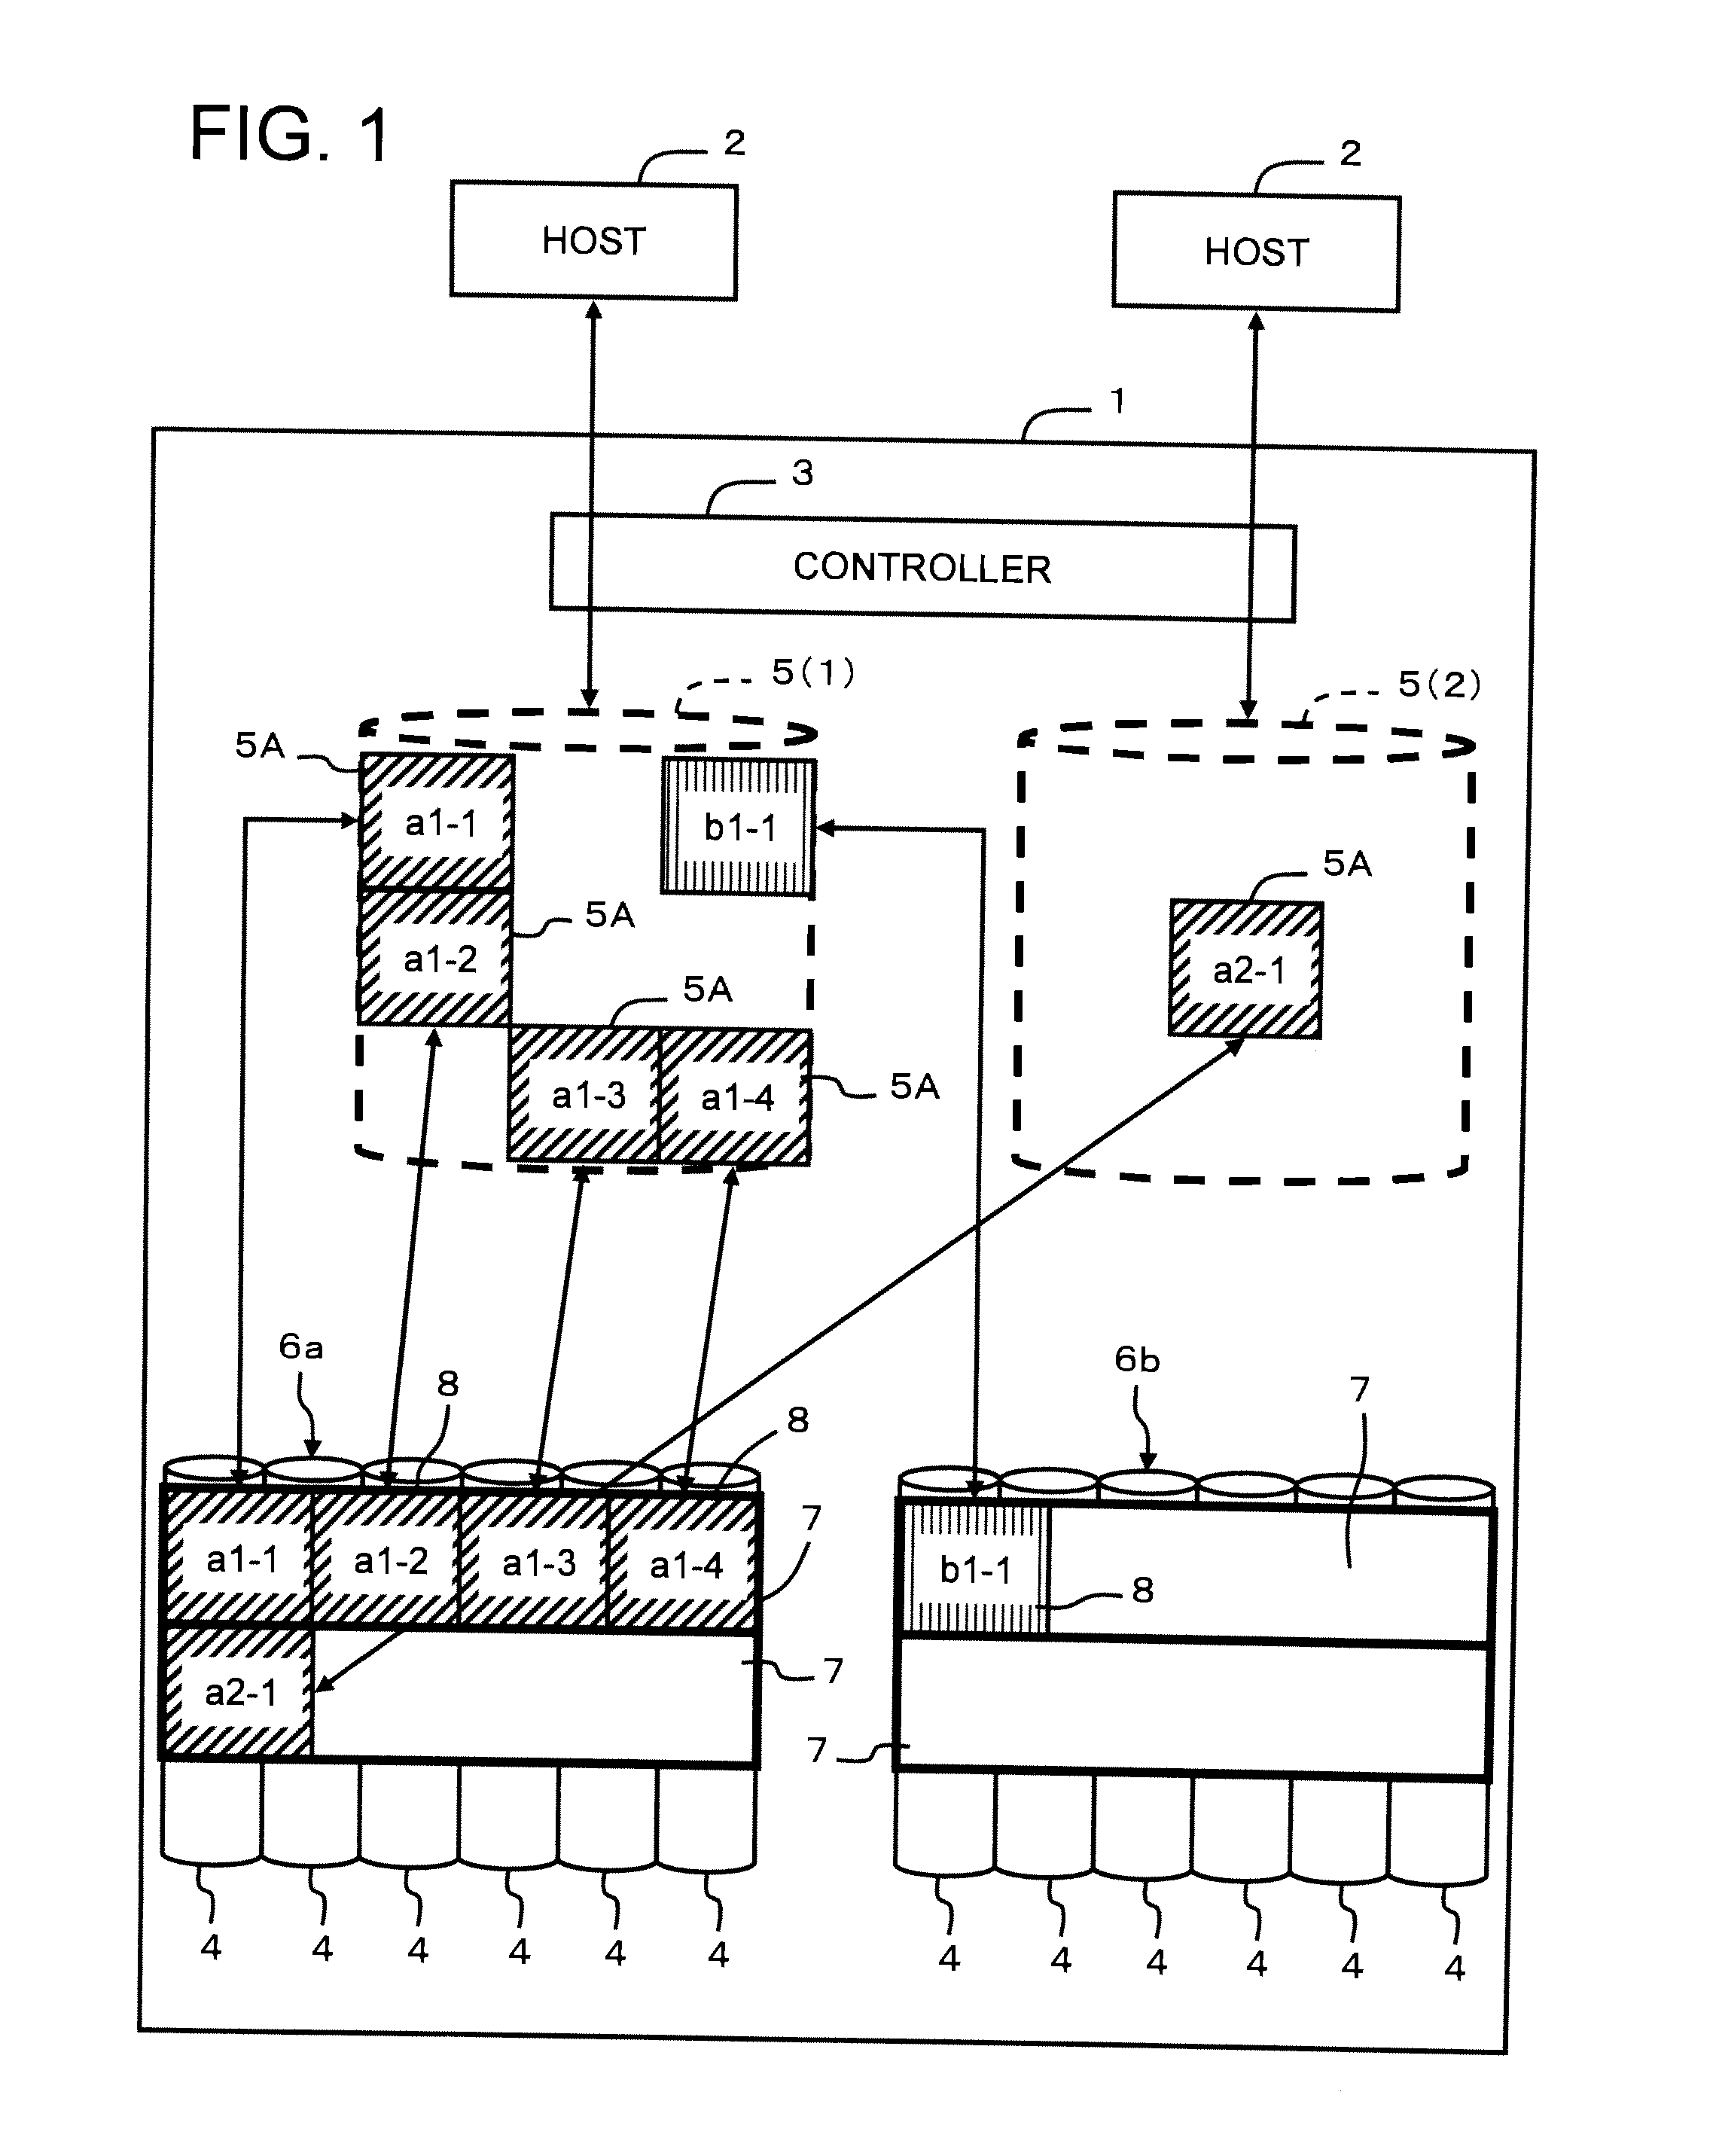 Controlling methods of storage control device and virtual volumes